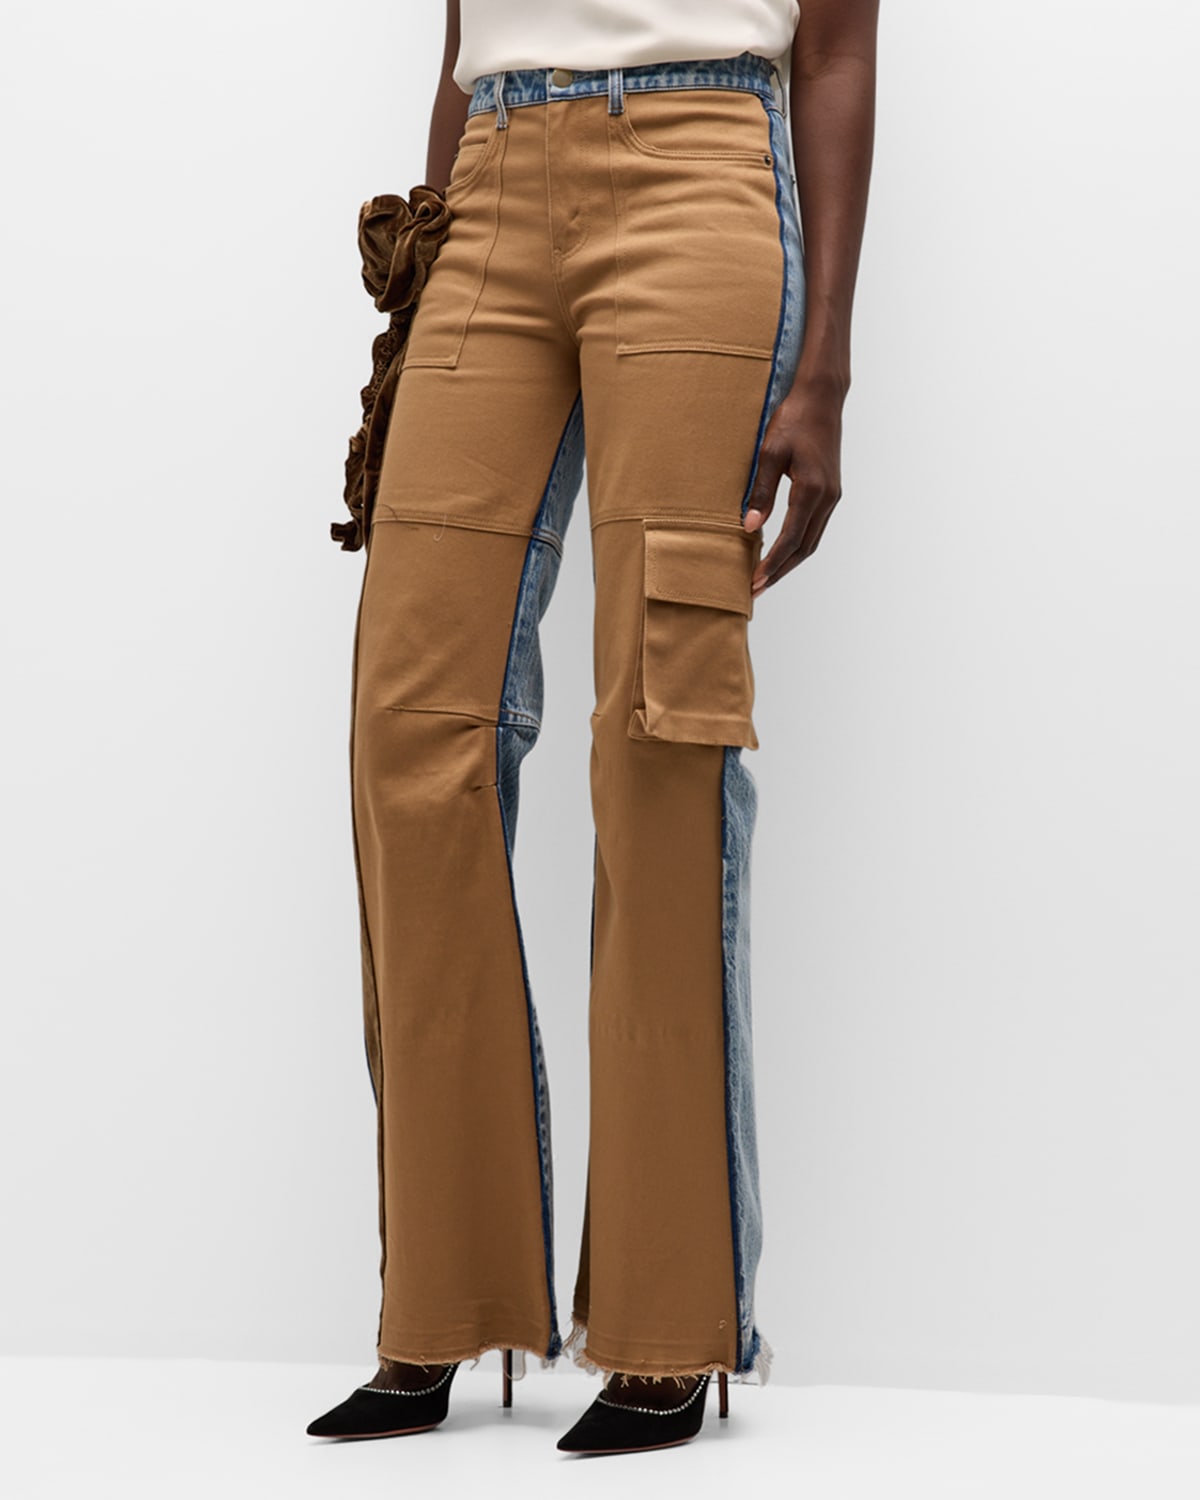 Hellessy Tanner Mixed-media Floral-applique Straight-leg Cargo Jeans In Lili Wash/khaki